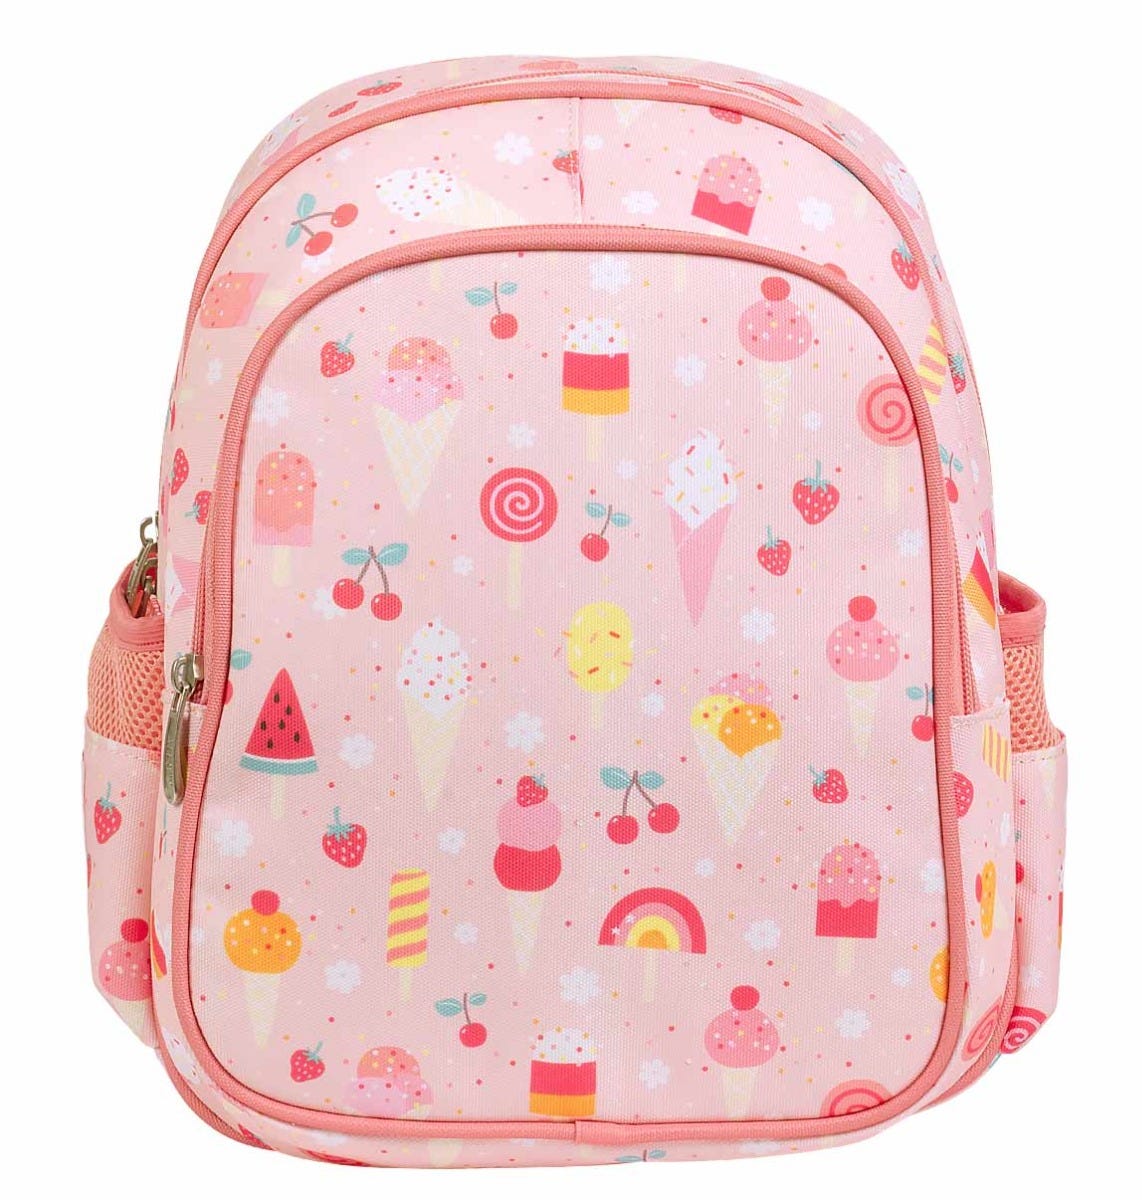 A LITTLE LOVELY COMPANY - Backpack Ice-cream